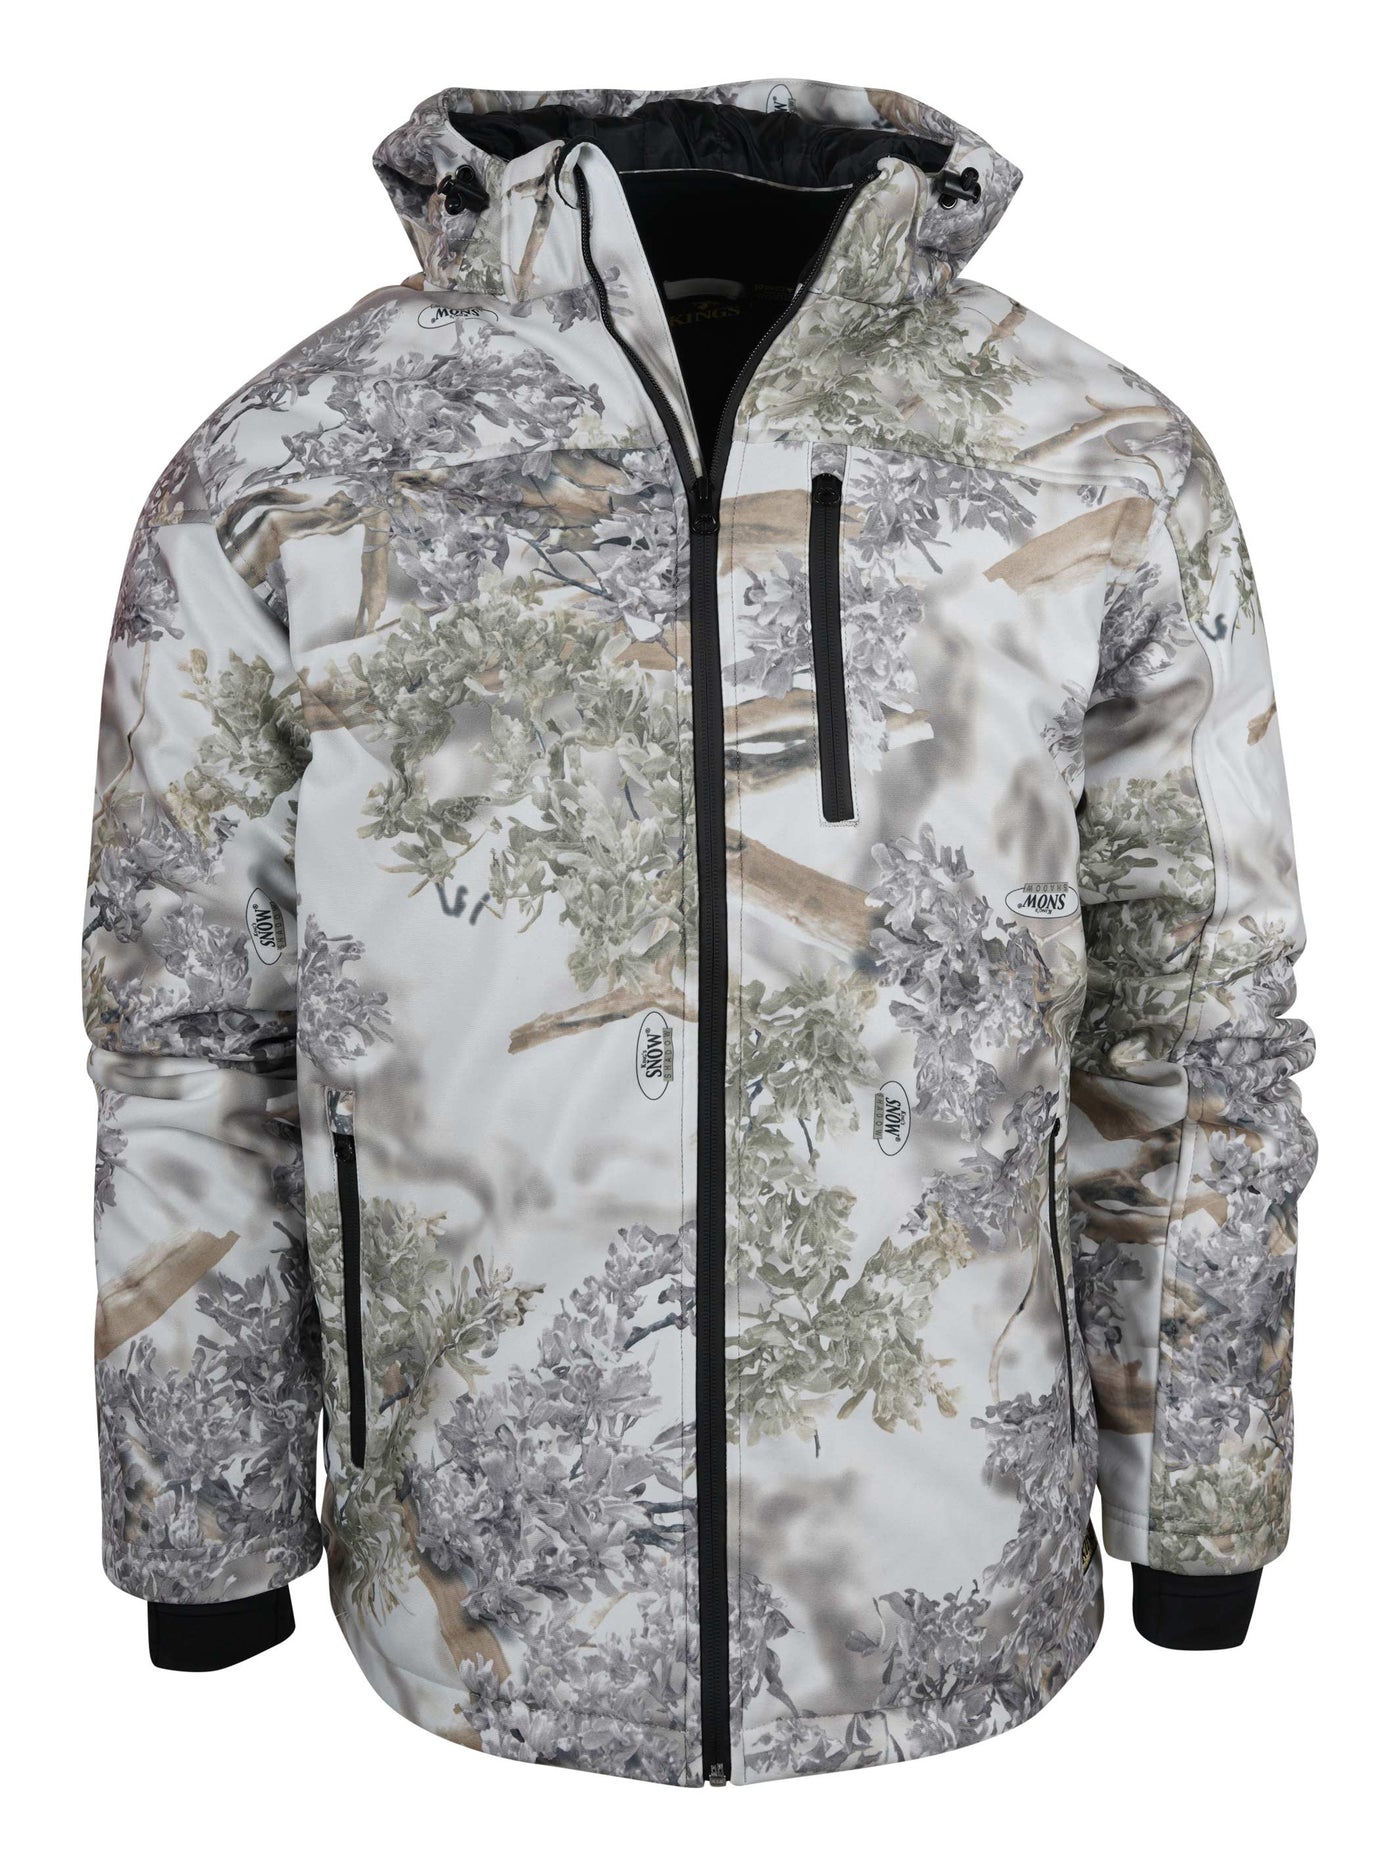 Weather Pro Insulated Jacket in Snow Shadow | Corbotras lochi